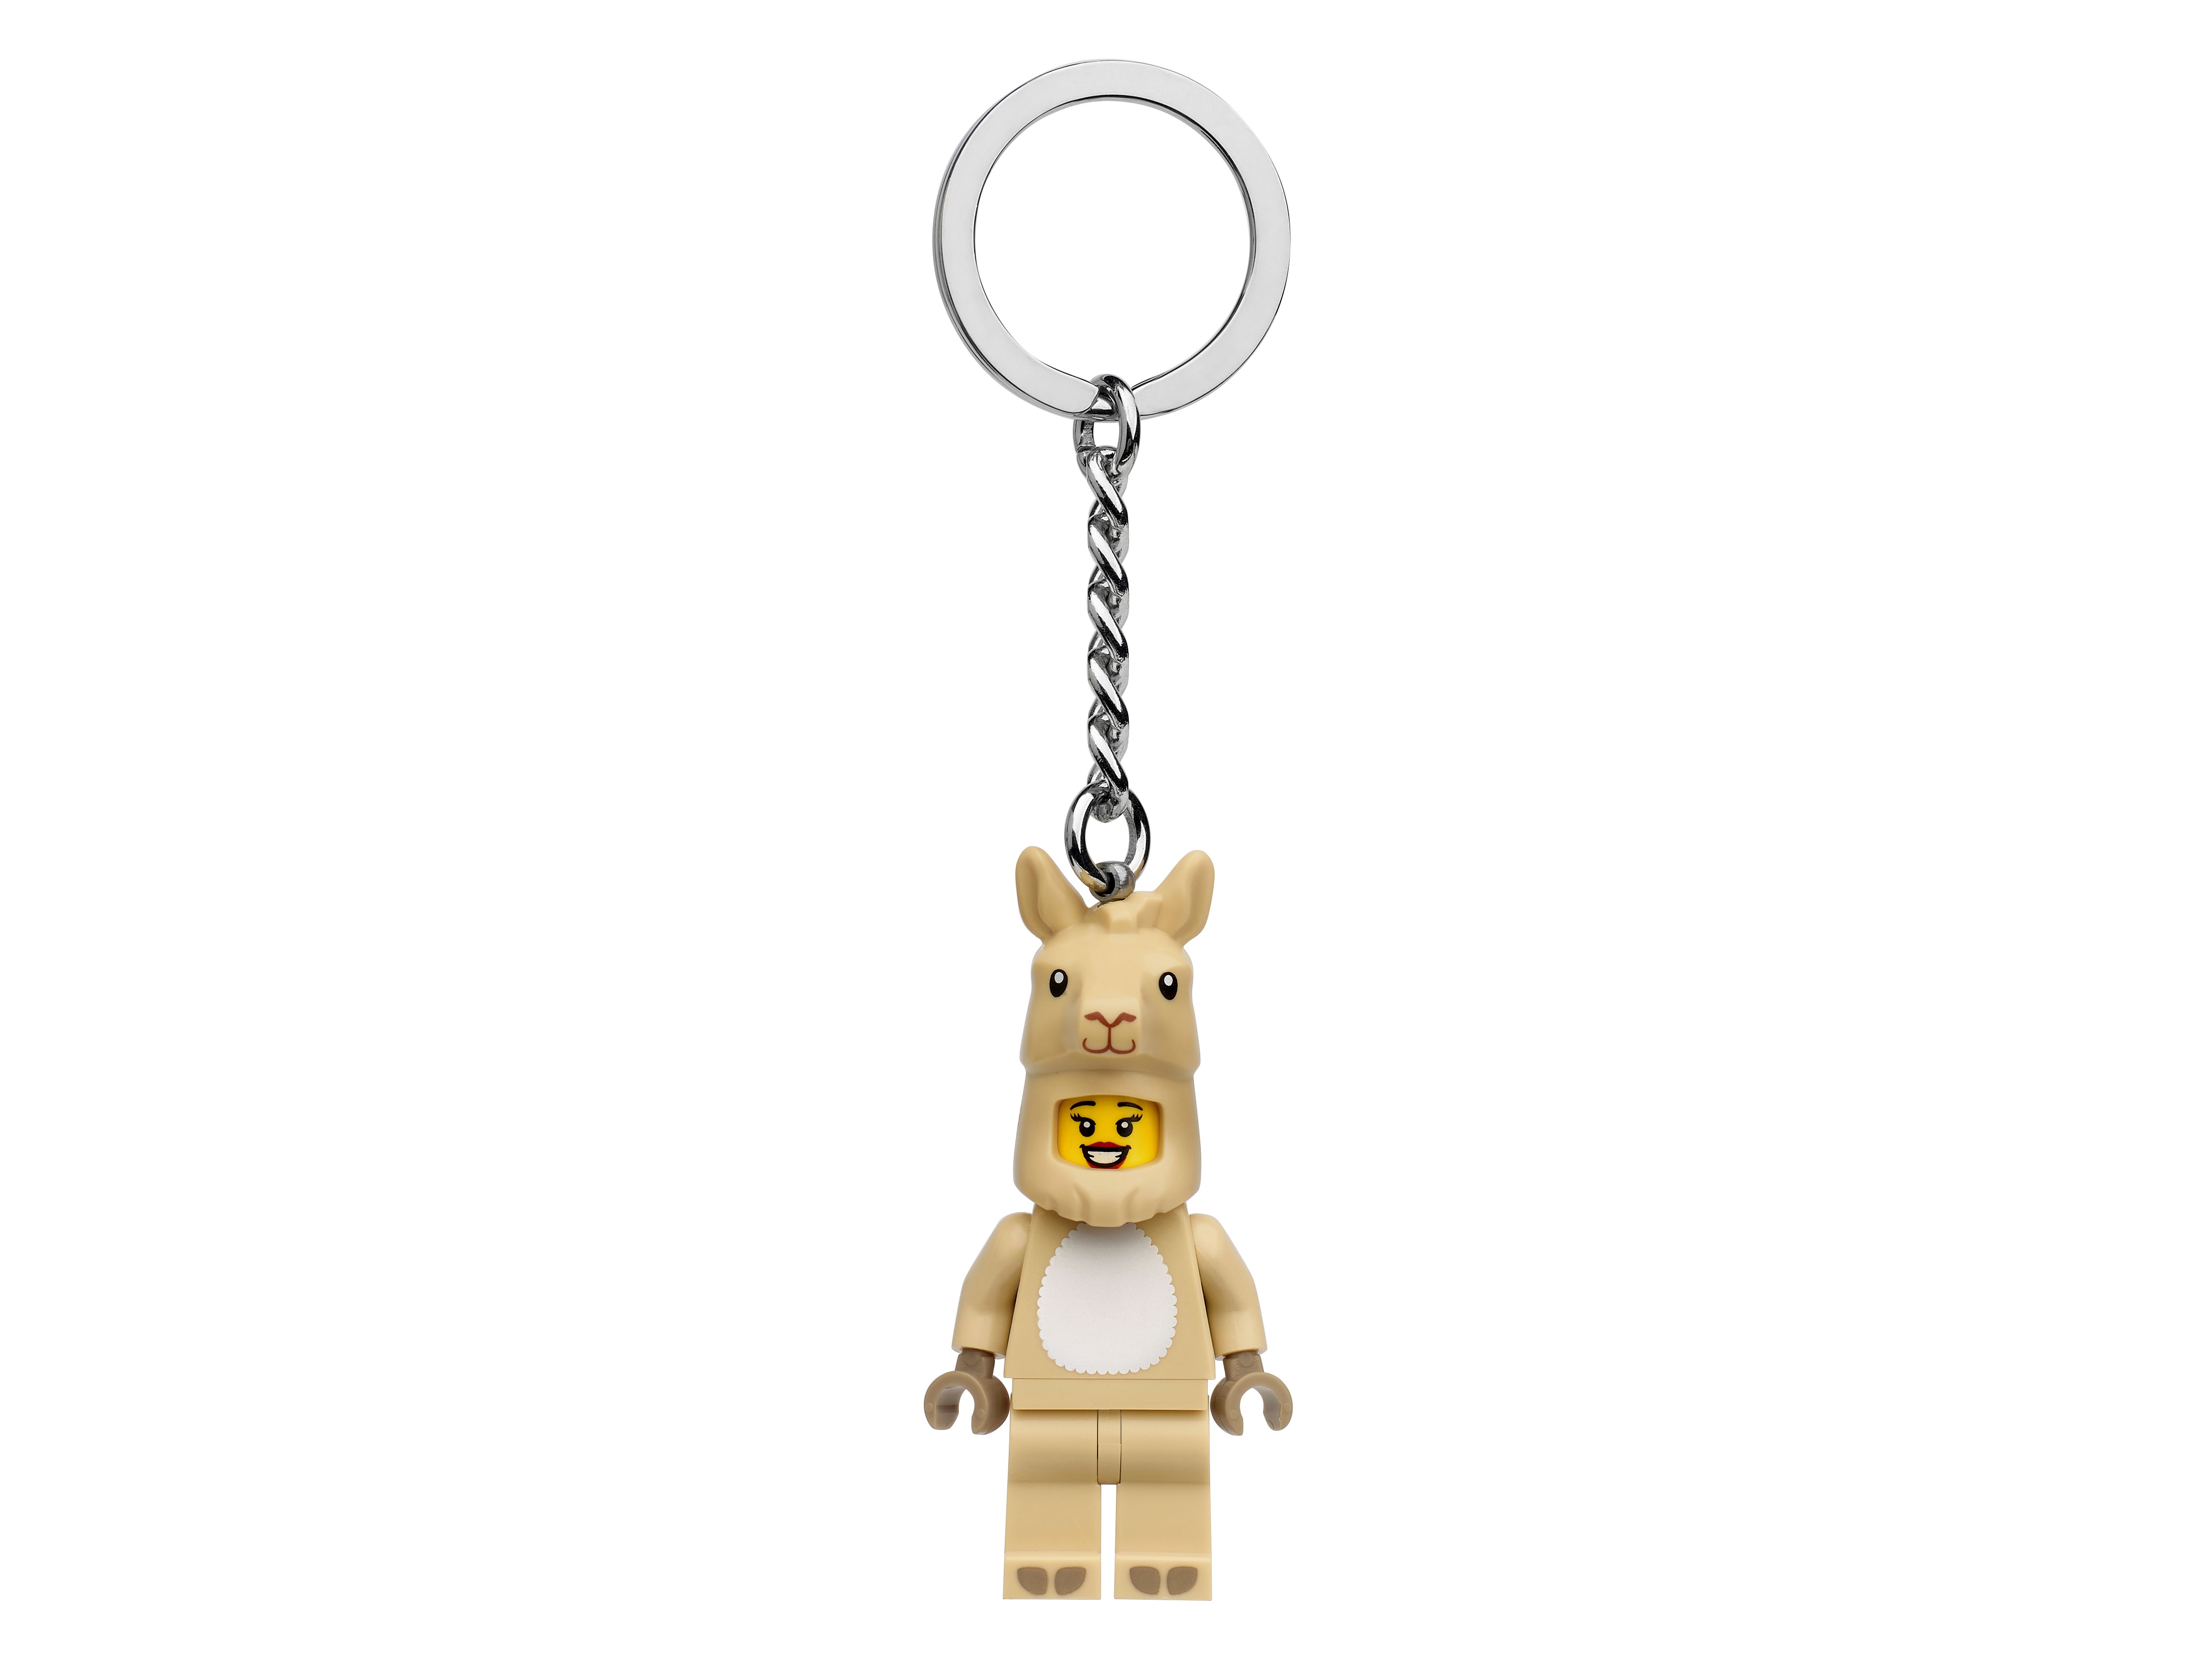 Find LEGO Goodies In The Middle Of Lidl From Next Week! – The Brick Post!